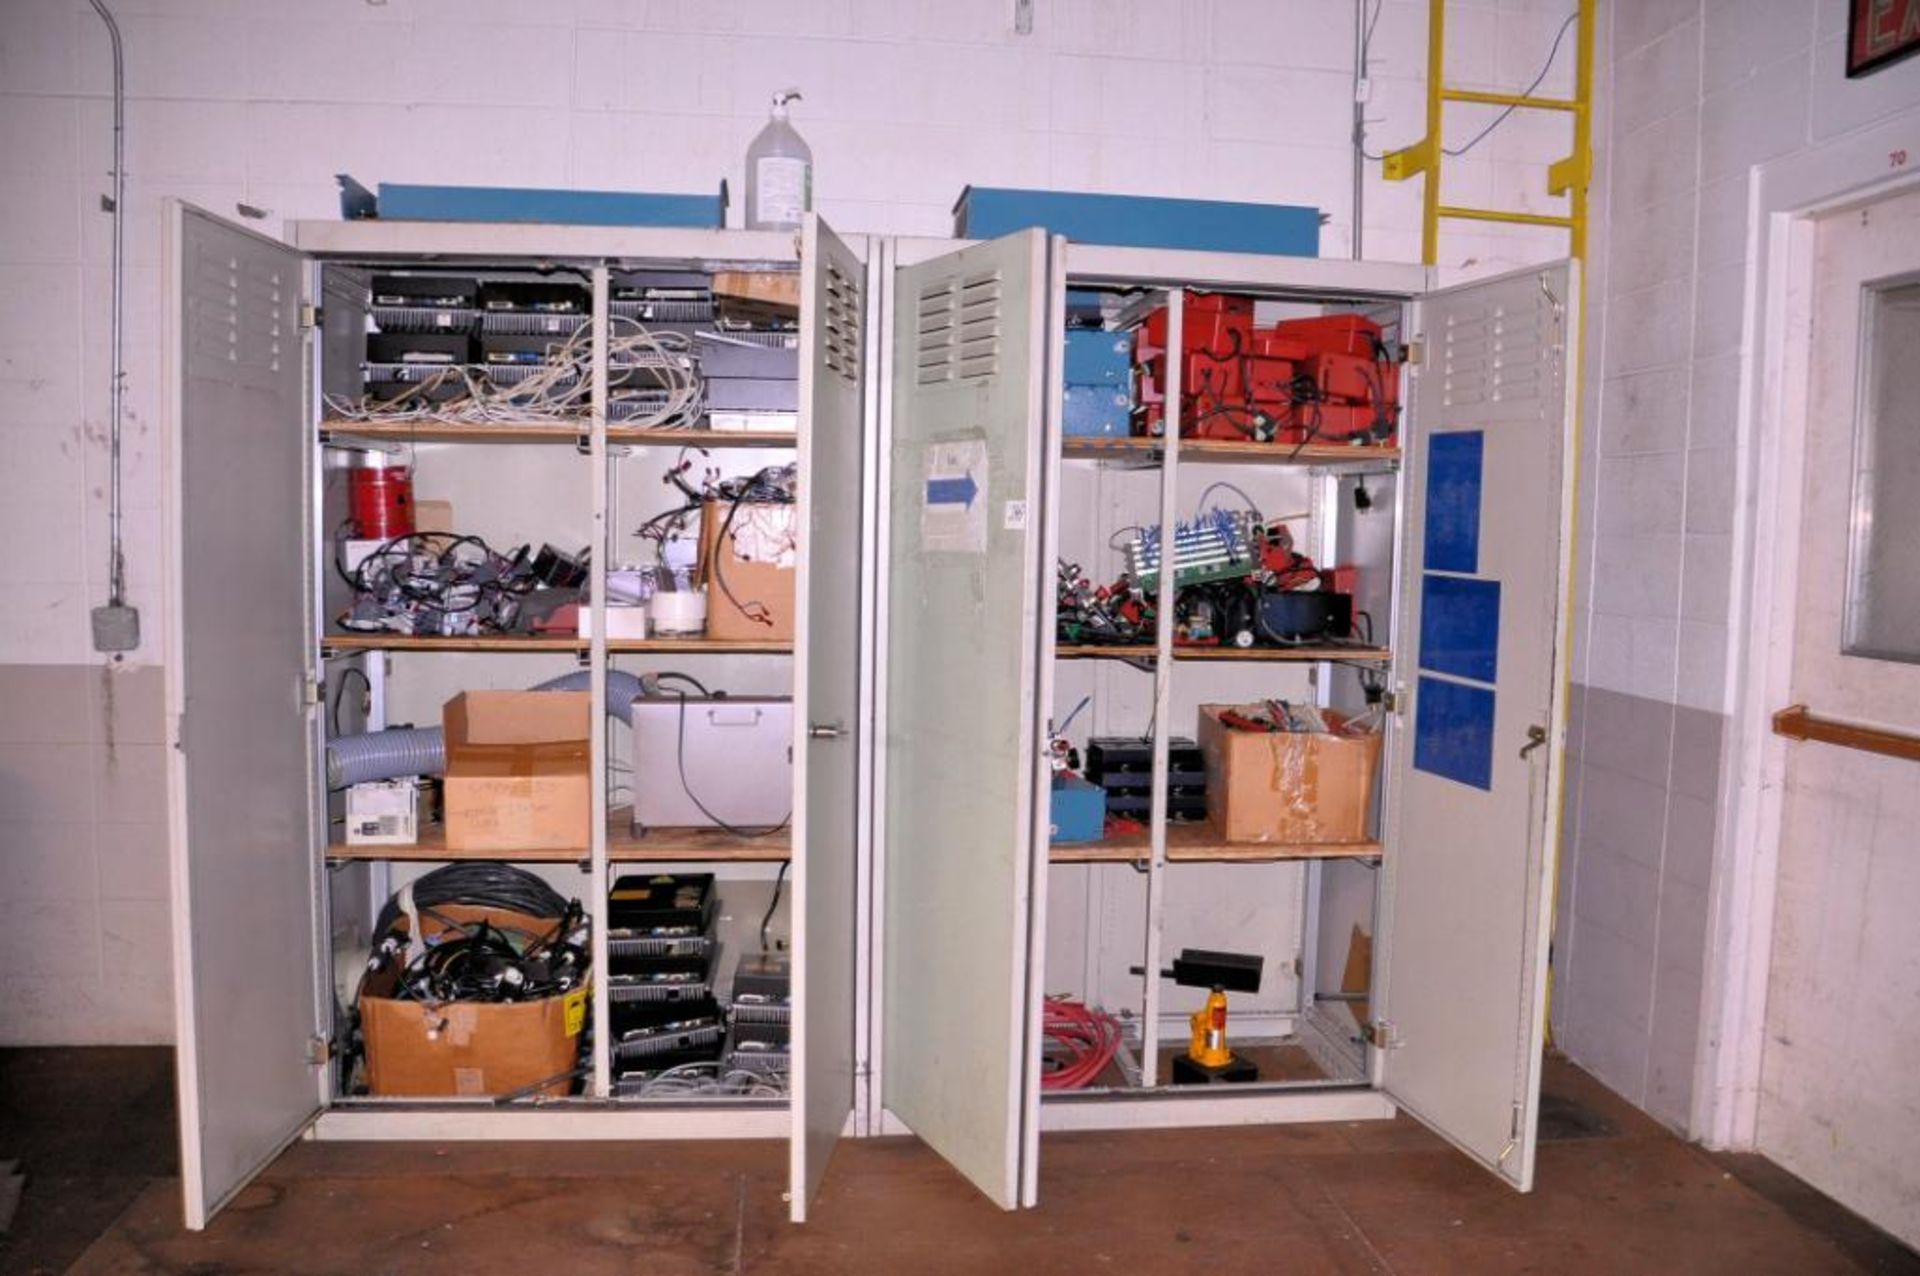 Lot - (4) Heavy Duty 2-Door Supply Cabinets with Electronic Boards and Machine Parts